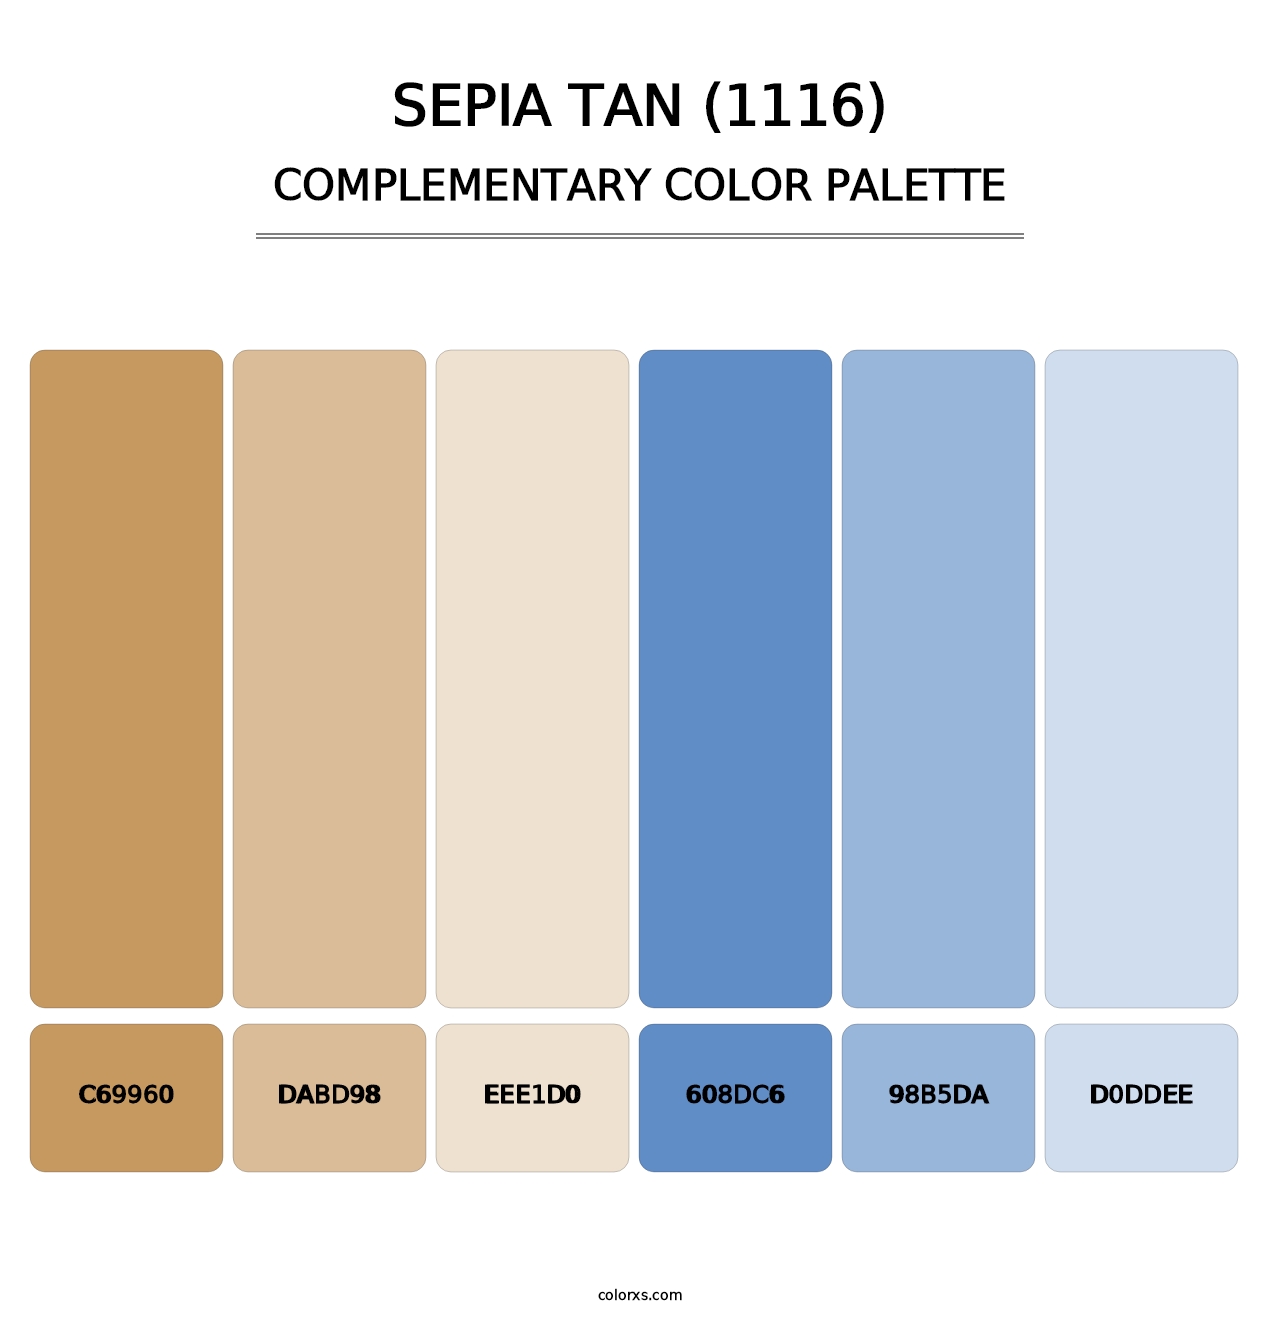 Sepia Tan (1116) - Complementary Color Palette